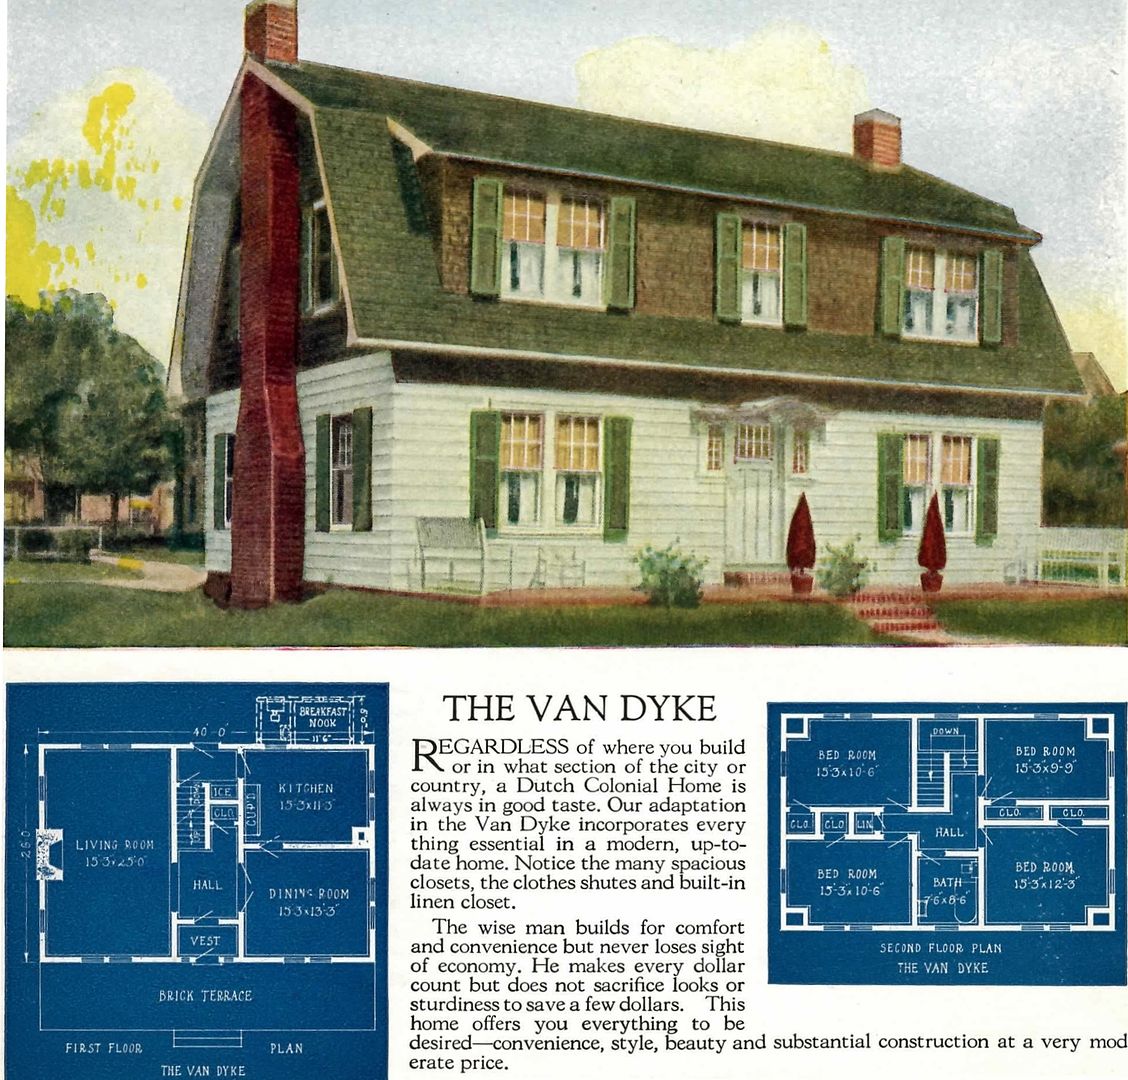 The Van Dyke was another popular house for Sterling.